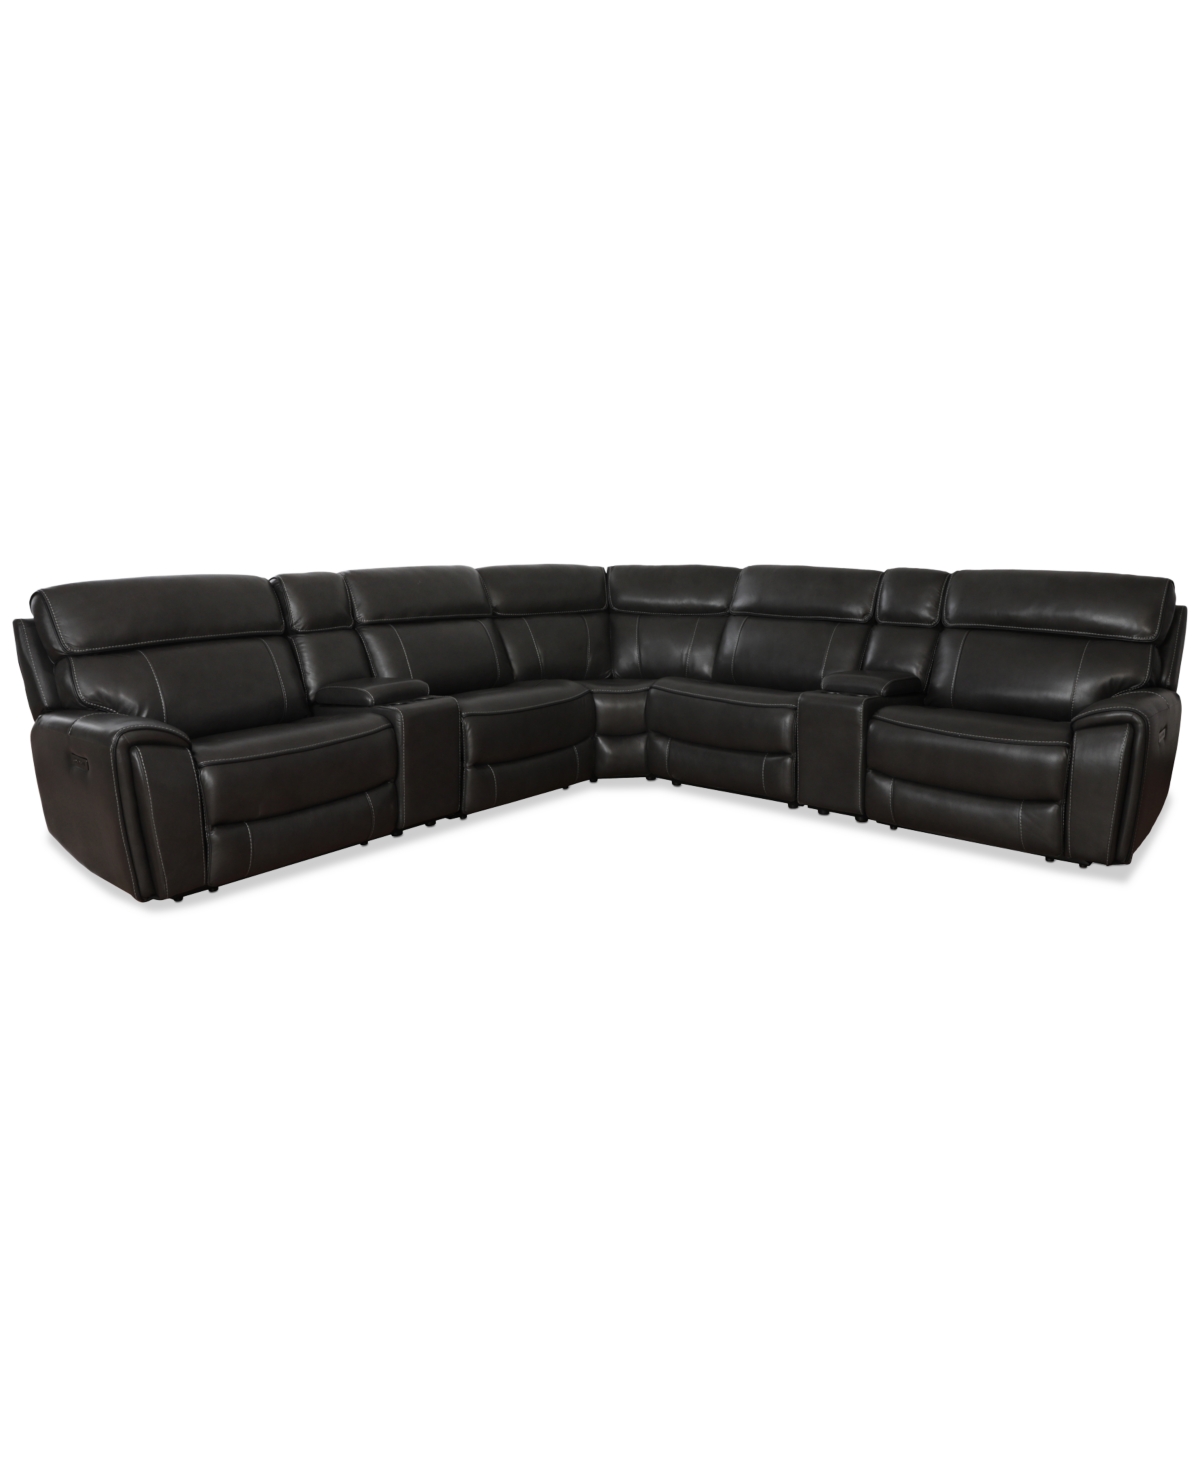 Macy's Hutchenson 132.5" 7-pc. Zero Gravity Leather Sectional With 3 Power Recliners And 2 Consoles, Create In Grey